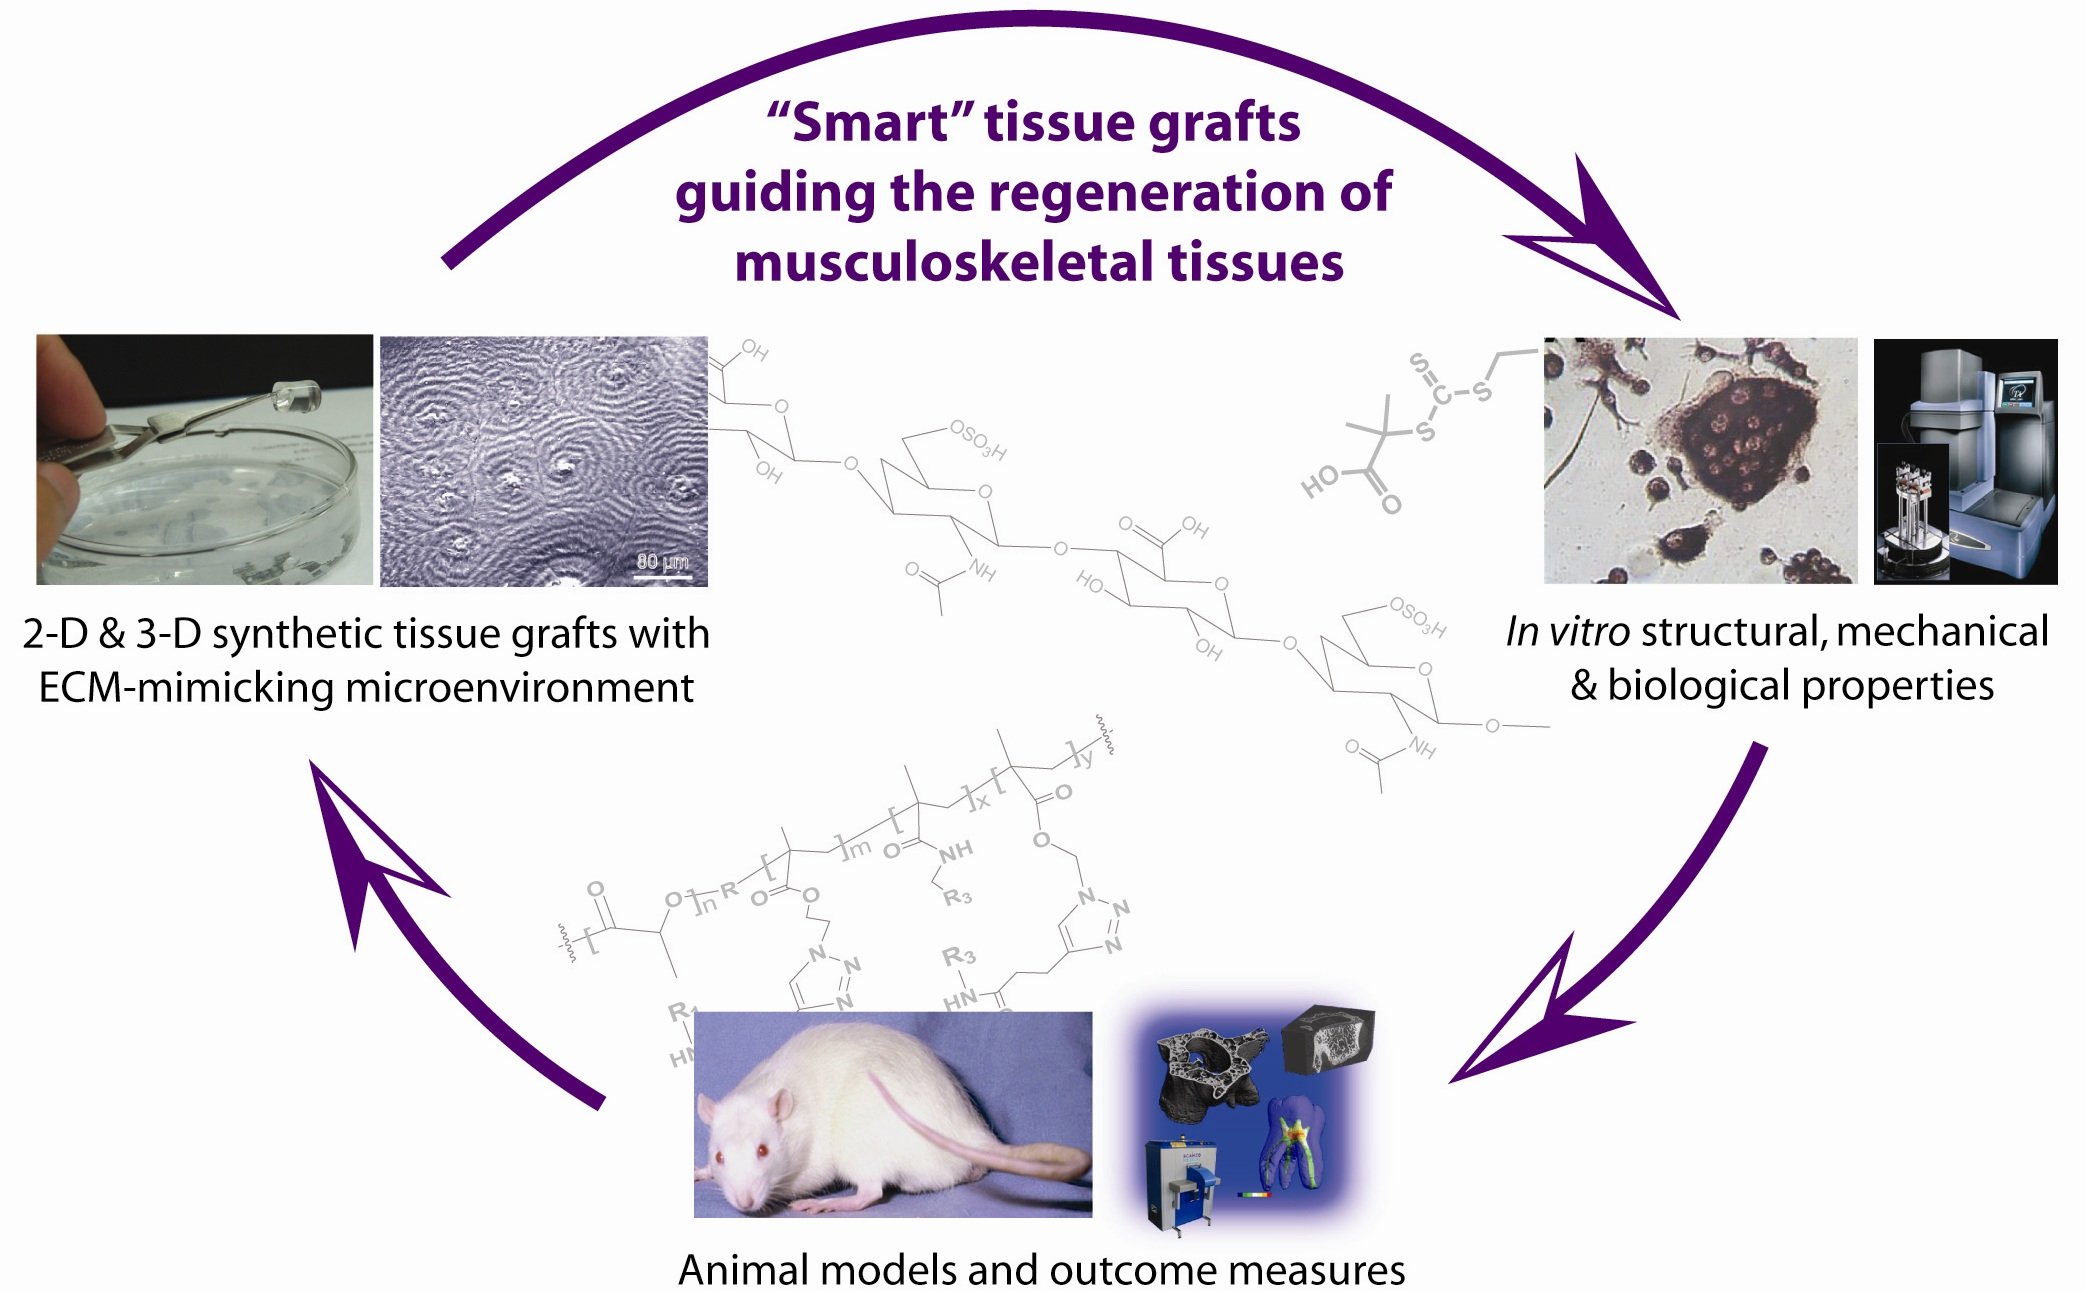 Synthetic tissue grafts and smart implants guiding the repair and regeneration of musculoskeletal tissues